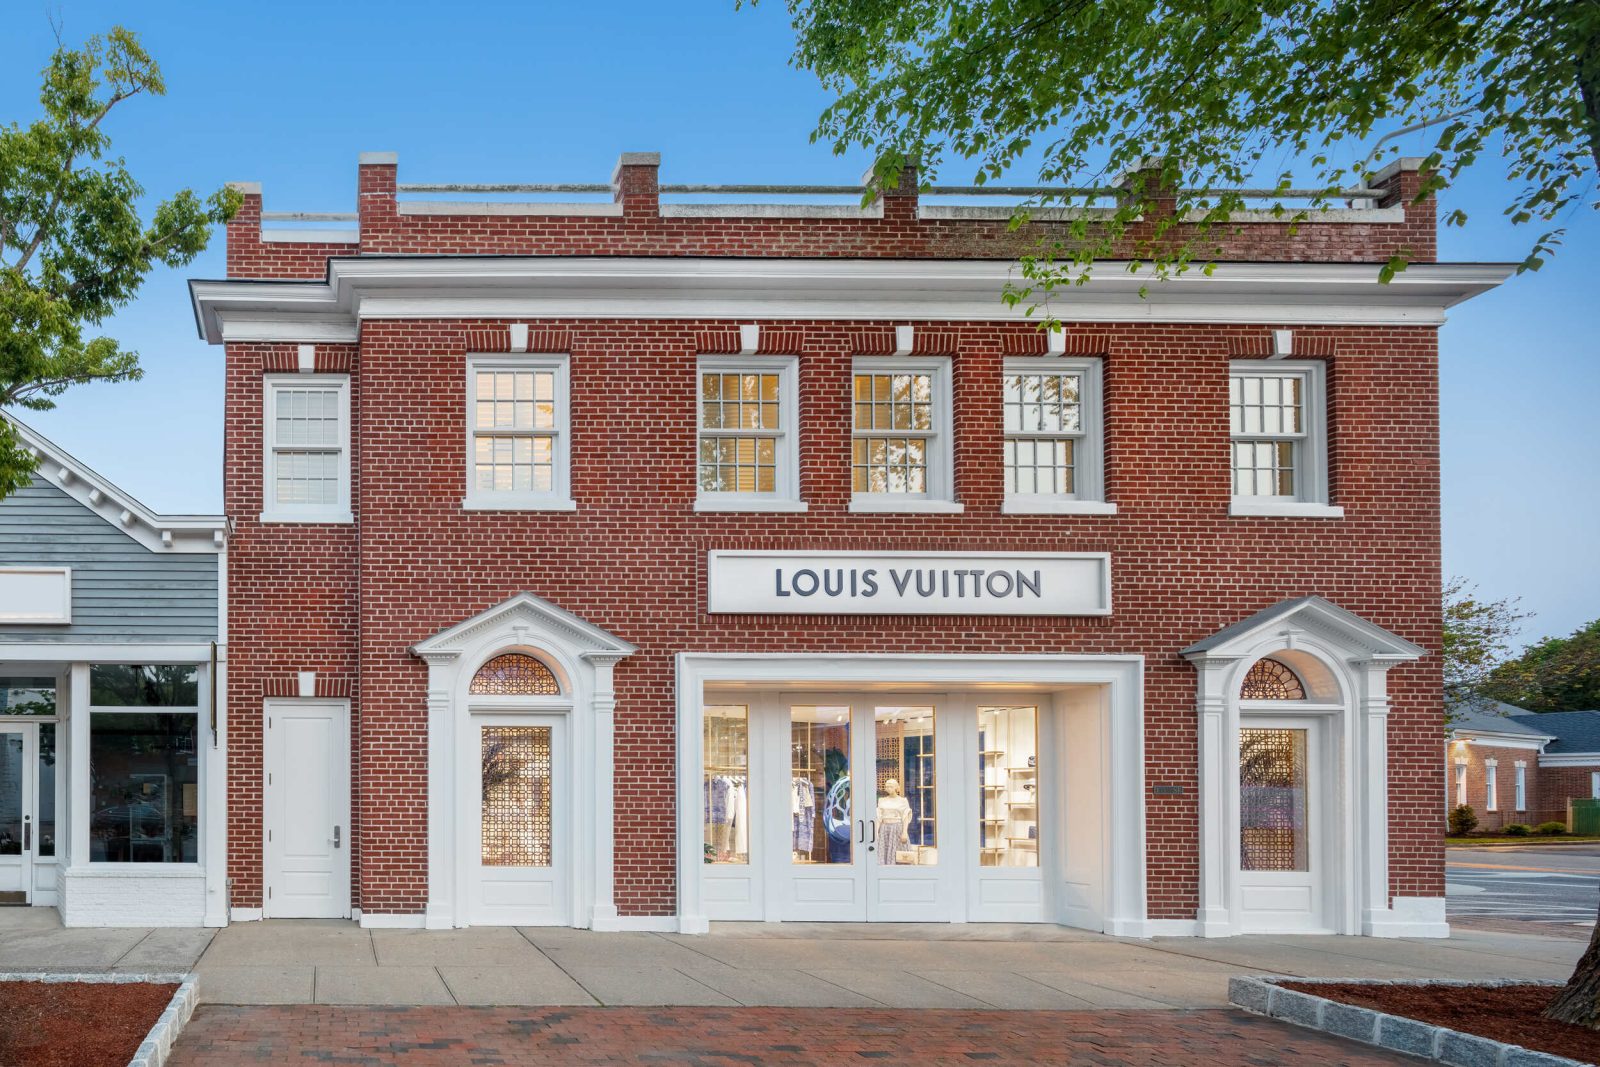 Louis Vuitton Makes Its Highly-Anticipated Debut In The Hamptons